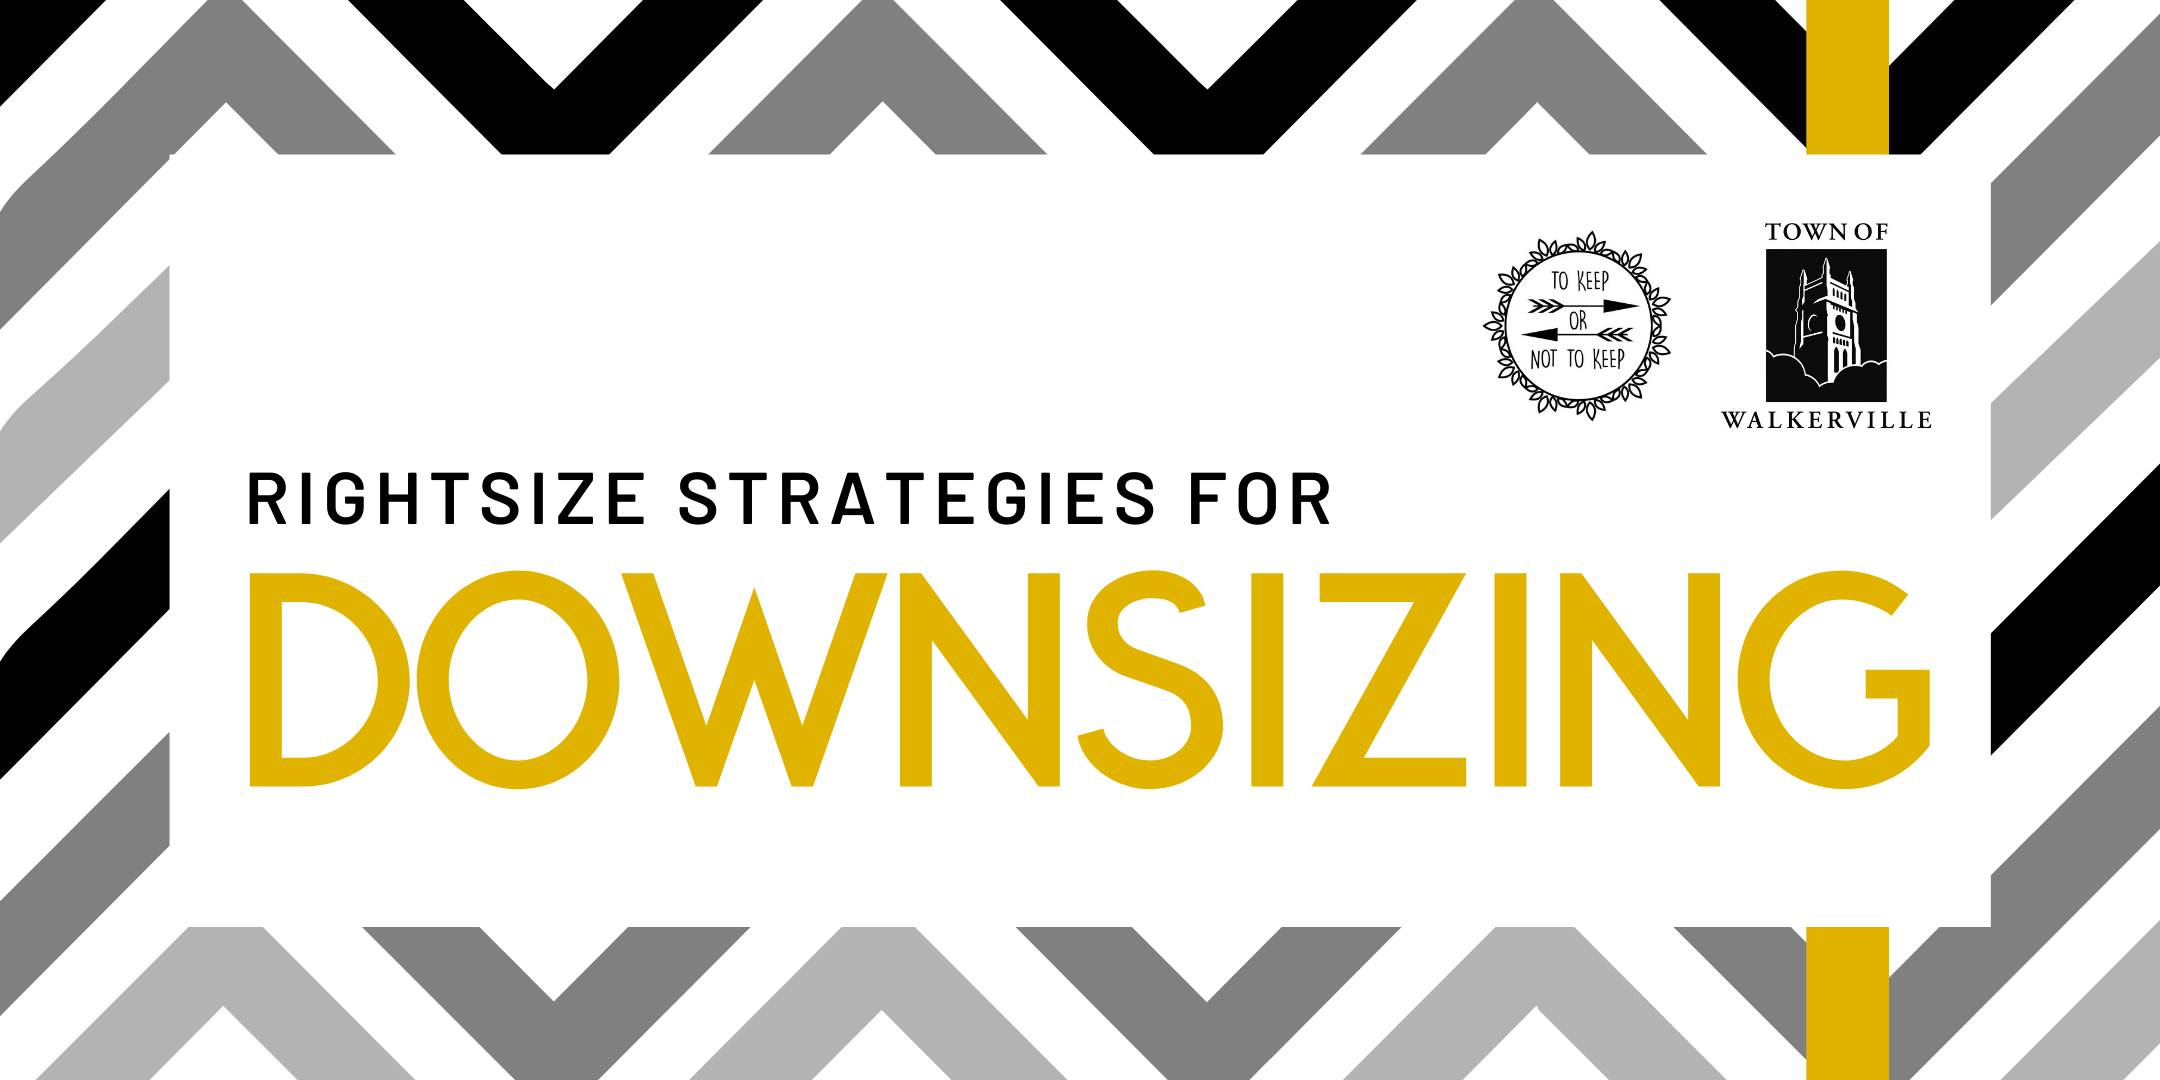 Downsizing Workshop: Rightsize your life right now!